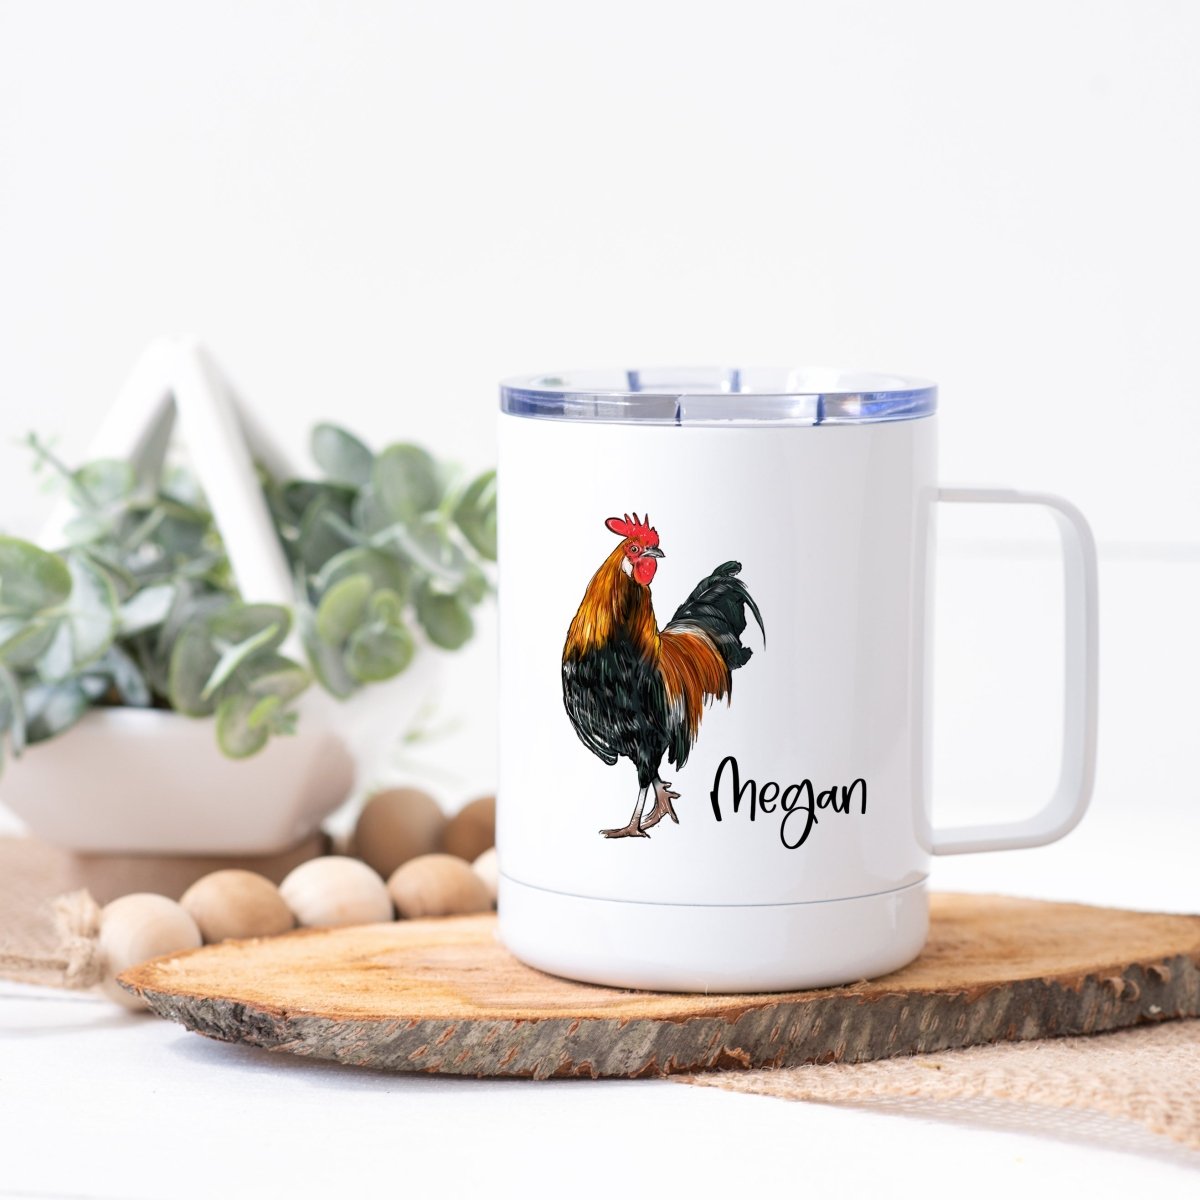 https://cdn.shopify.com/s/files/1/0522/5532/6403/products/personalized-rooster-steel-coffee-cup-165258_1600x.jpg?v=1698518513